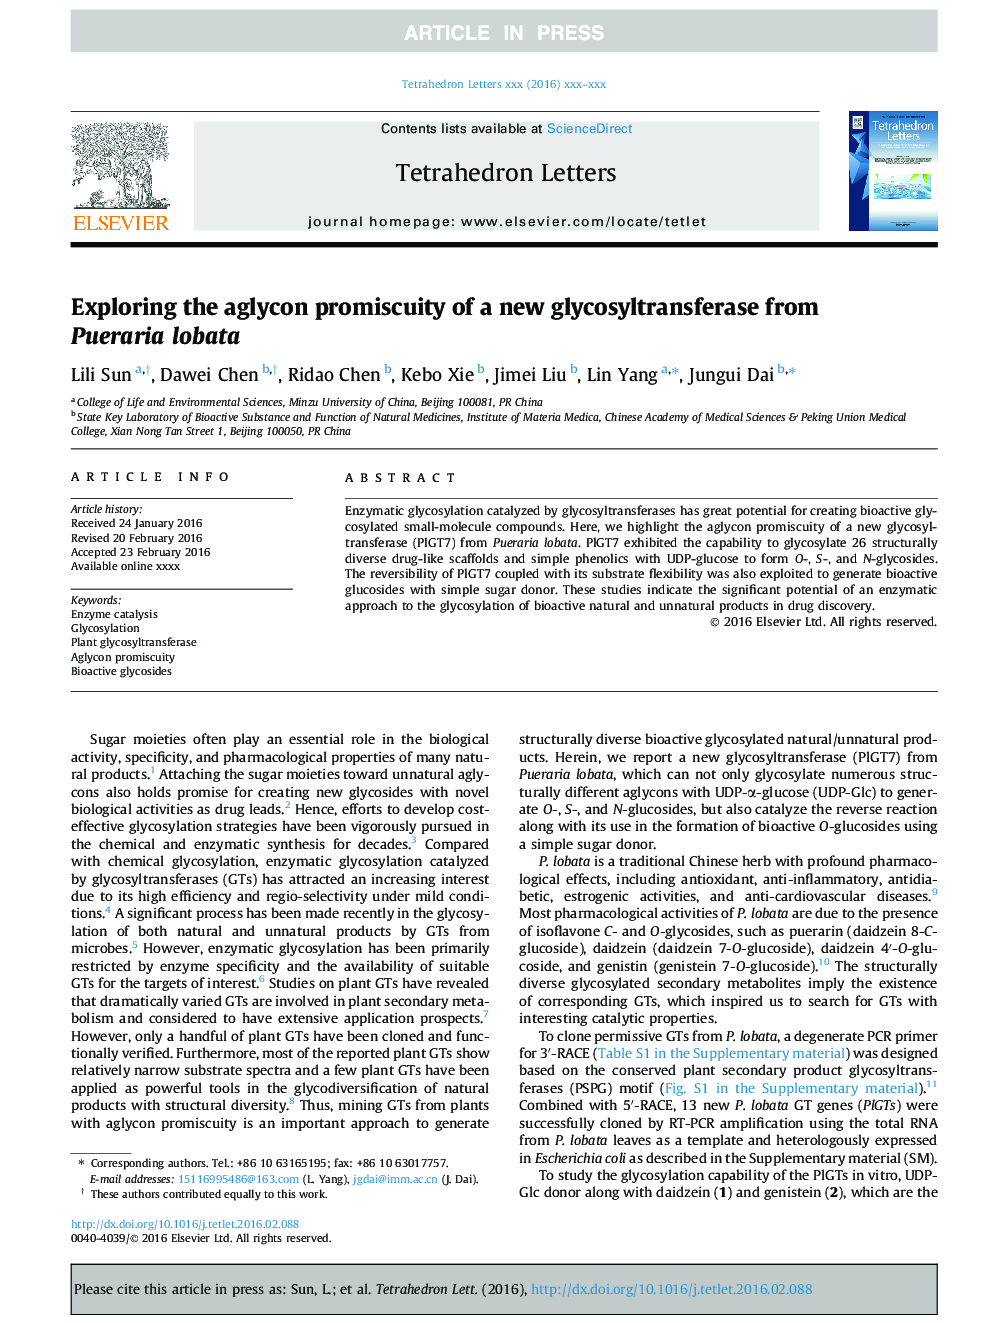 Exploring the aglycon promiscuity of a new glycosyltransferase from Pueraria lobata